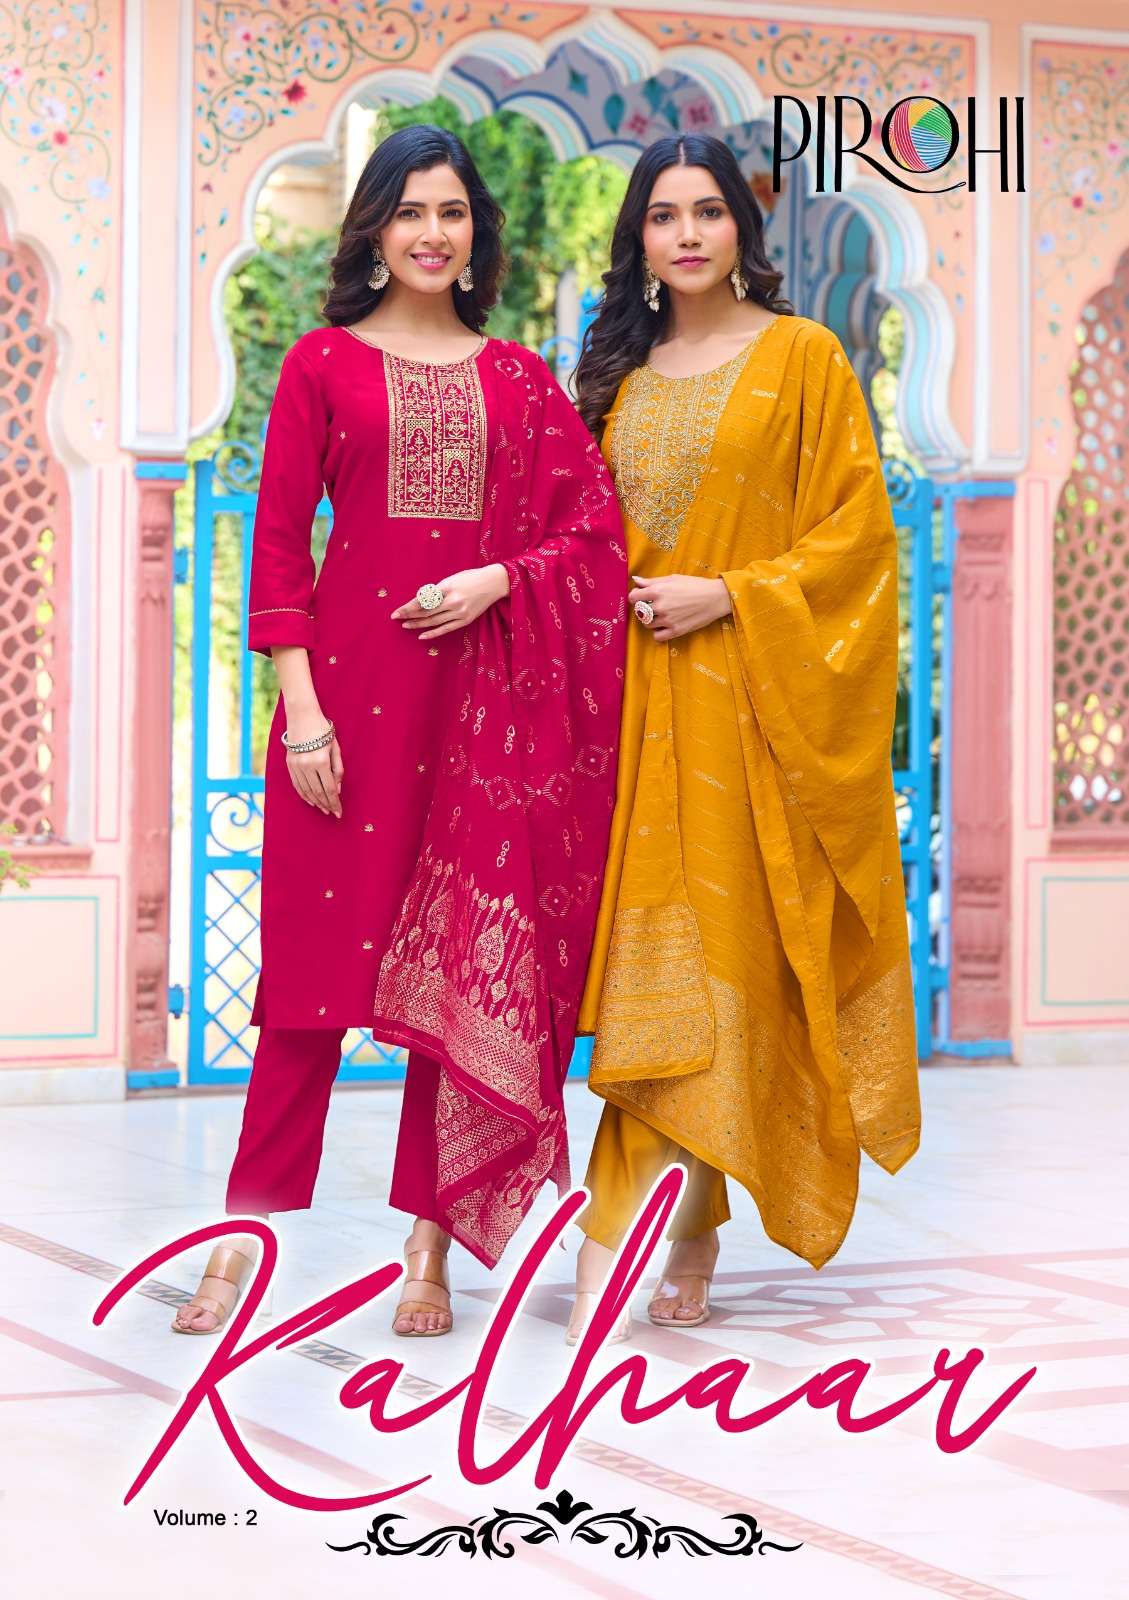 KALHAAR VOL 2 VATICAN SILK EMBROIDERY WORK KURTI WITH PANT AND BANARASI DUPPATTA BY PIROHI BRAND WHO...